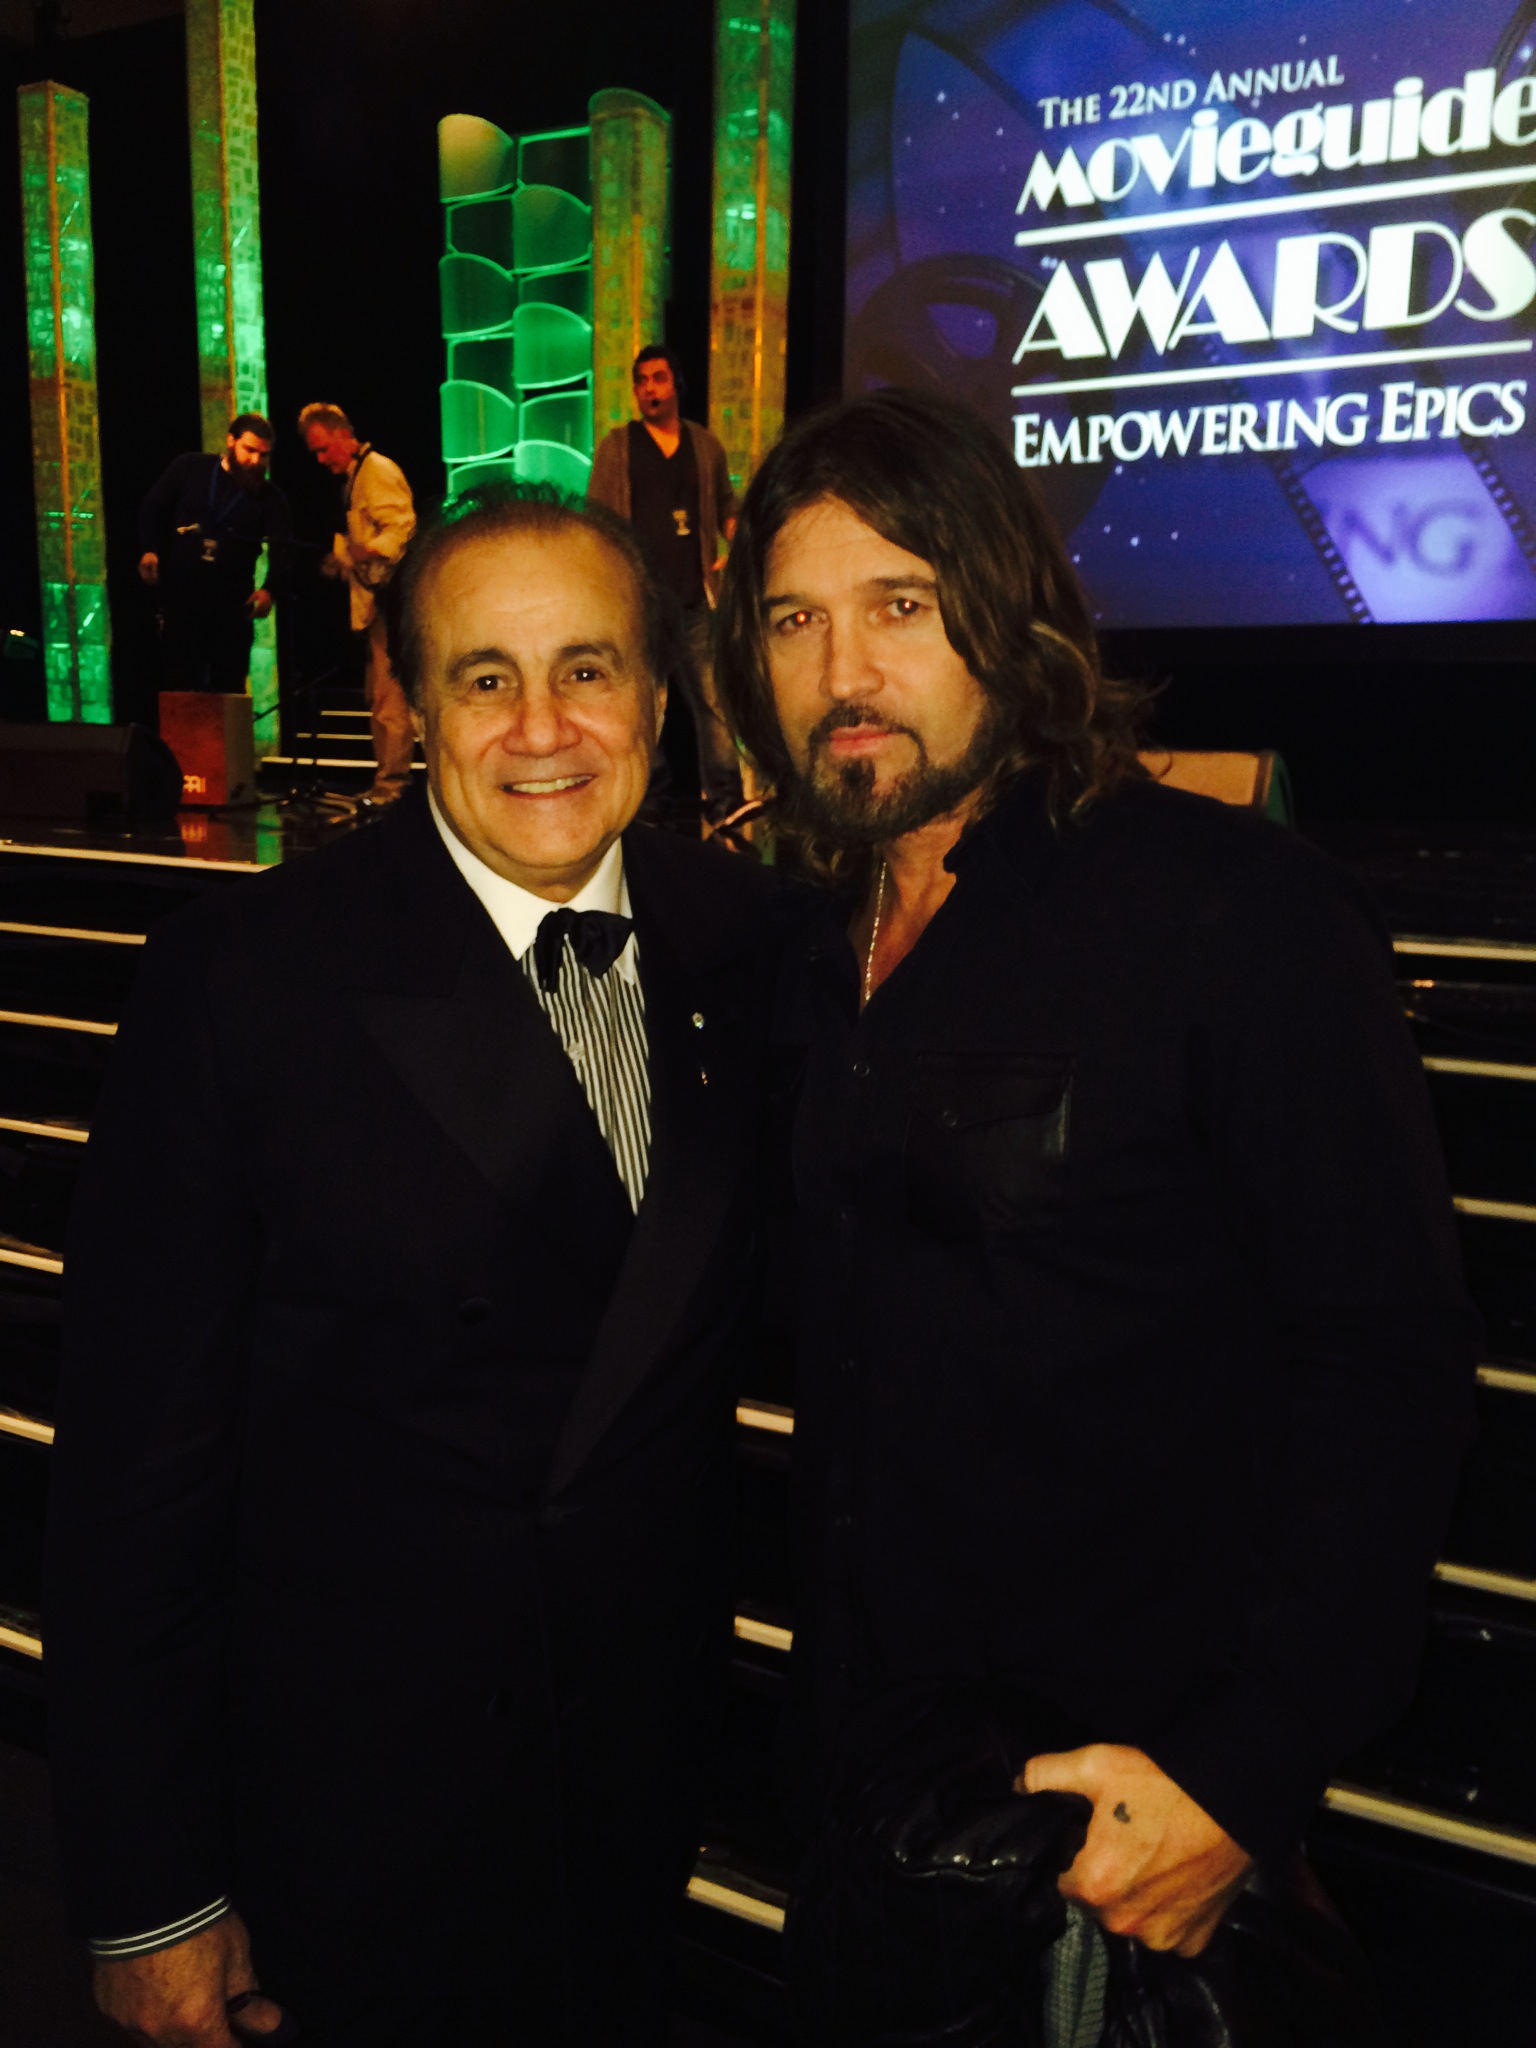 Executive Producer Larry Thompson (L) and Billy Ray Cyrus (R) at the 22nd Annual Movieguide Awards held at the Sierra Ballroom at the Universal Hilton, Universal City, CA on February 7, 2014.